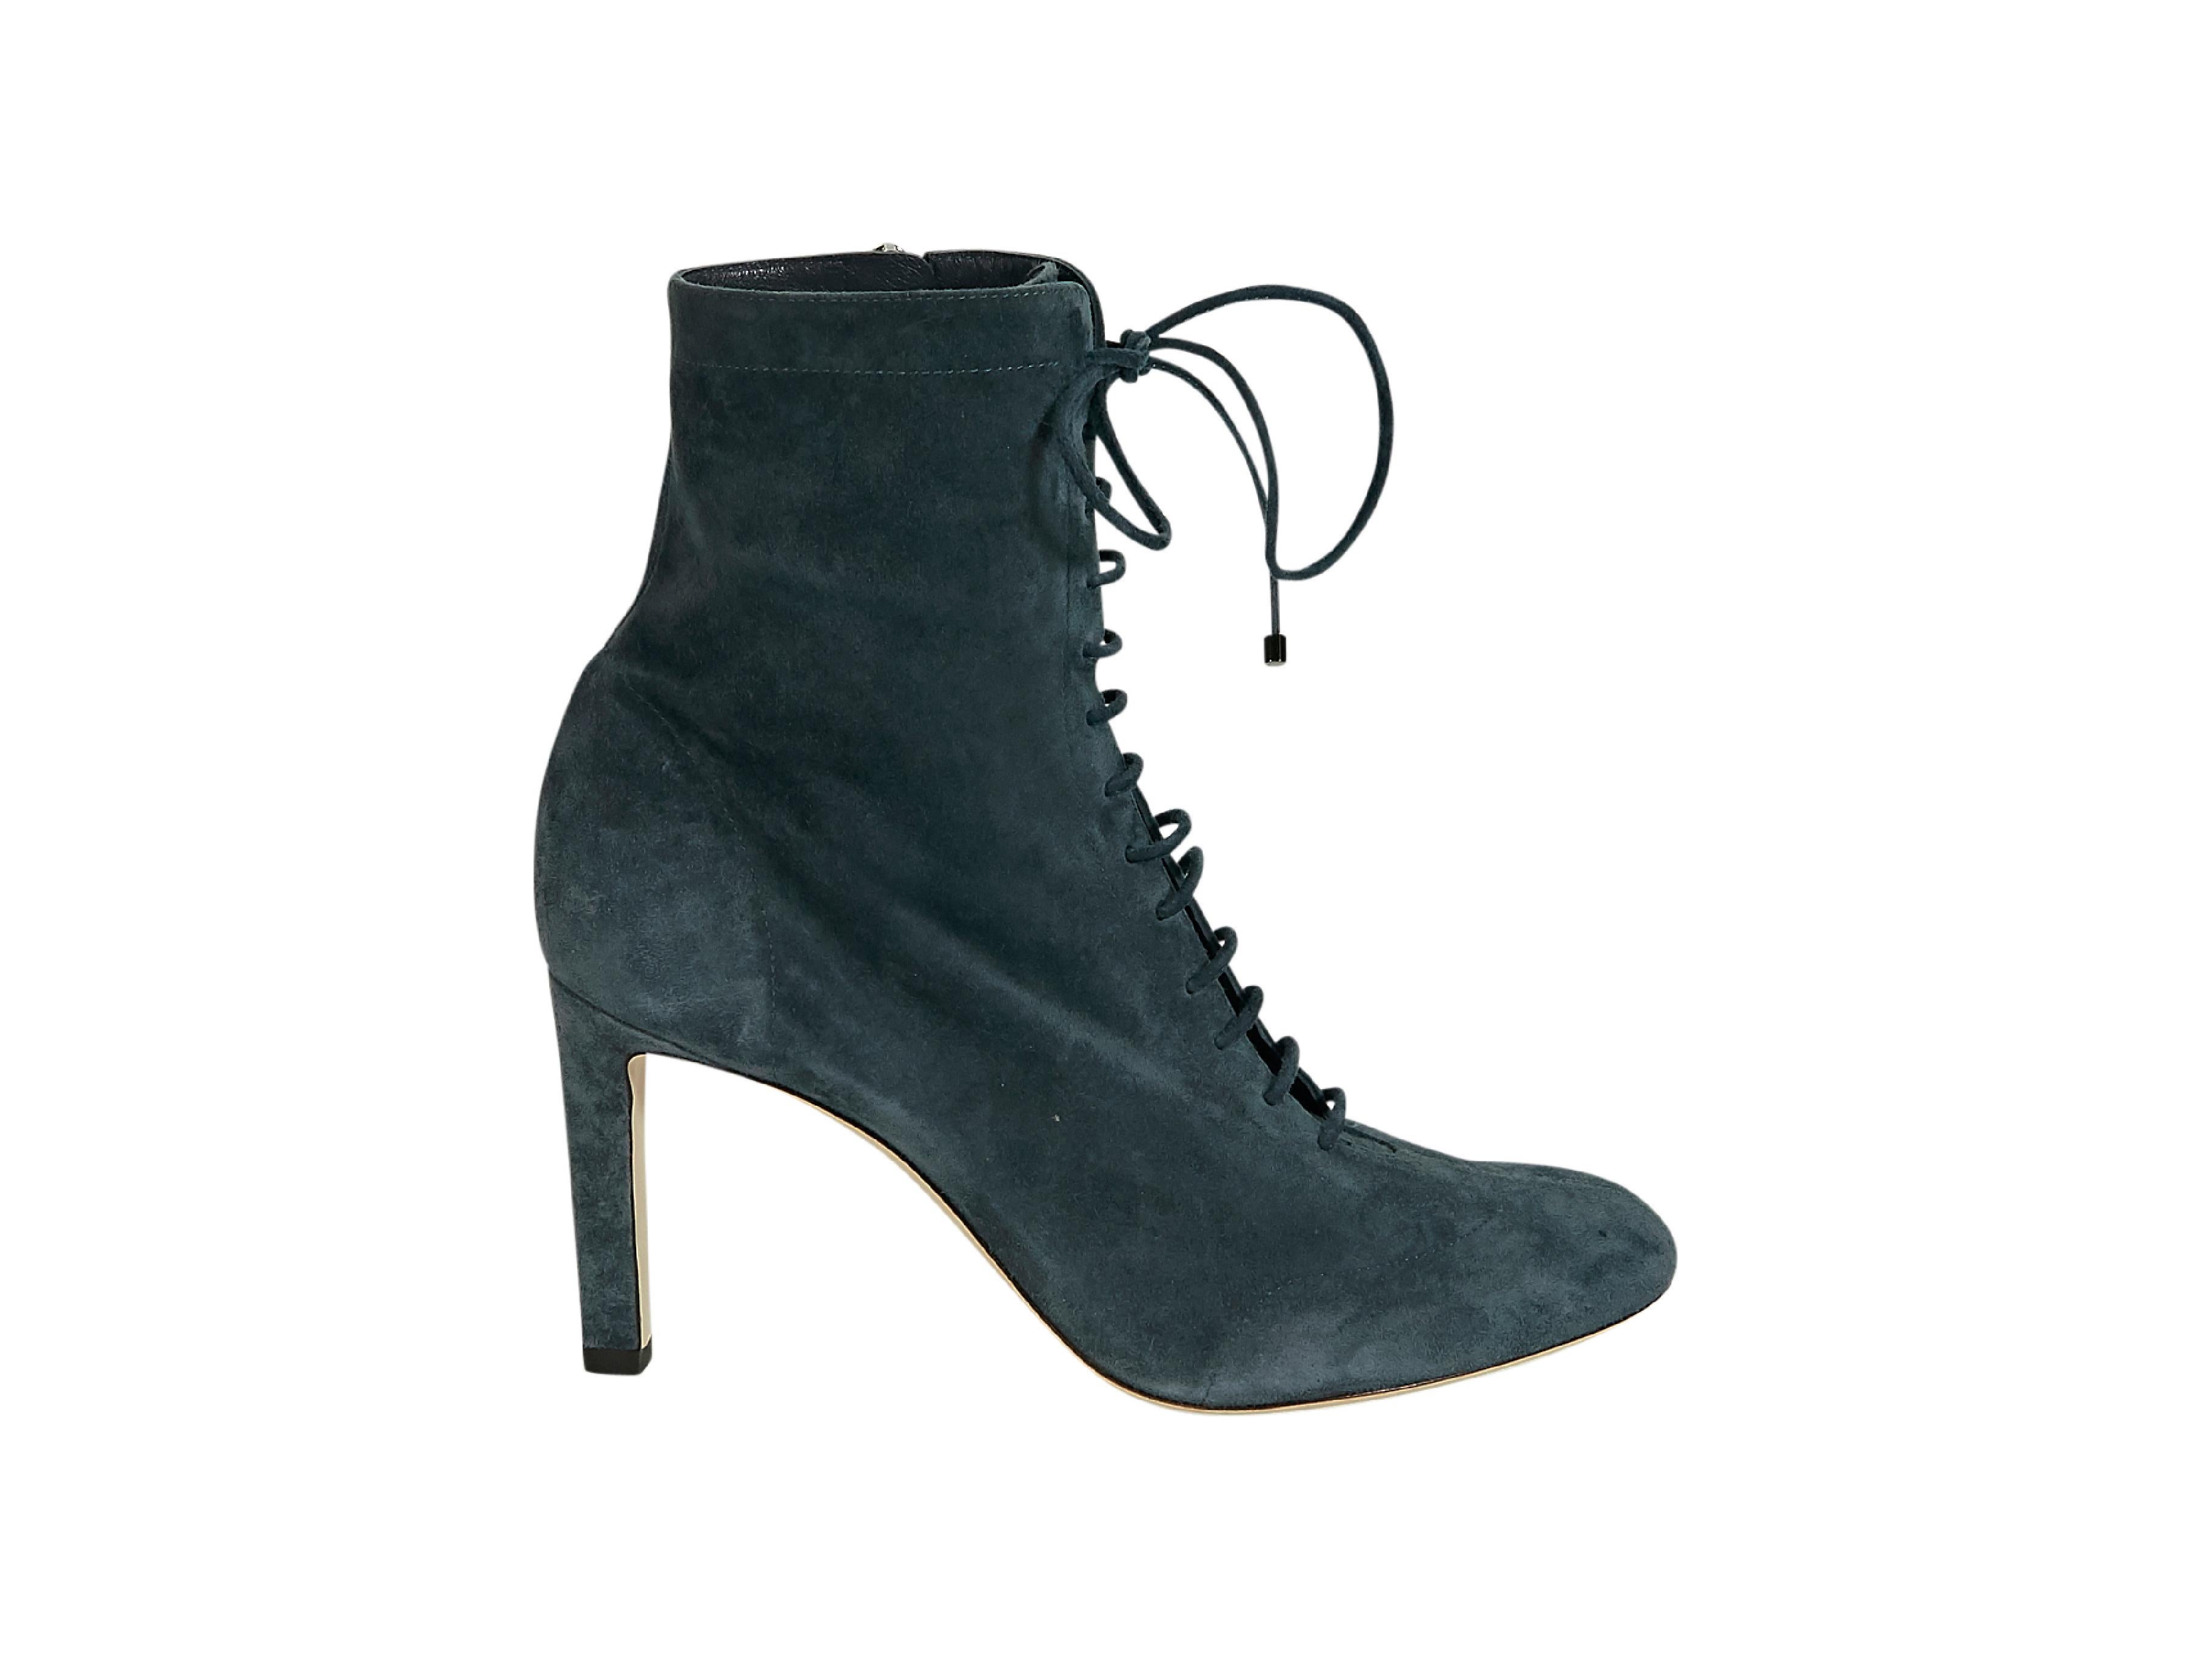 Product details:  Teal suede ankle boots by Jimmy Choo.  Lace-up panel.  Round toe.  Inner zip closure.  Silvertone hardware.  3.5